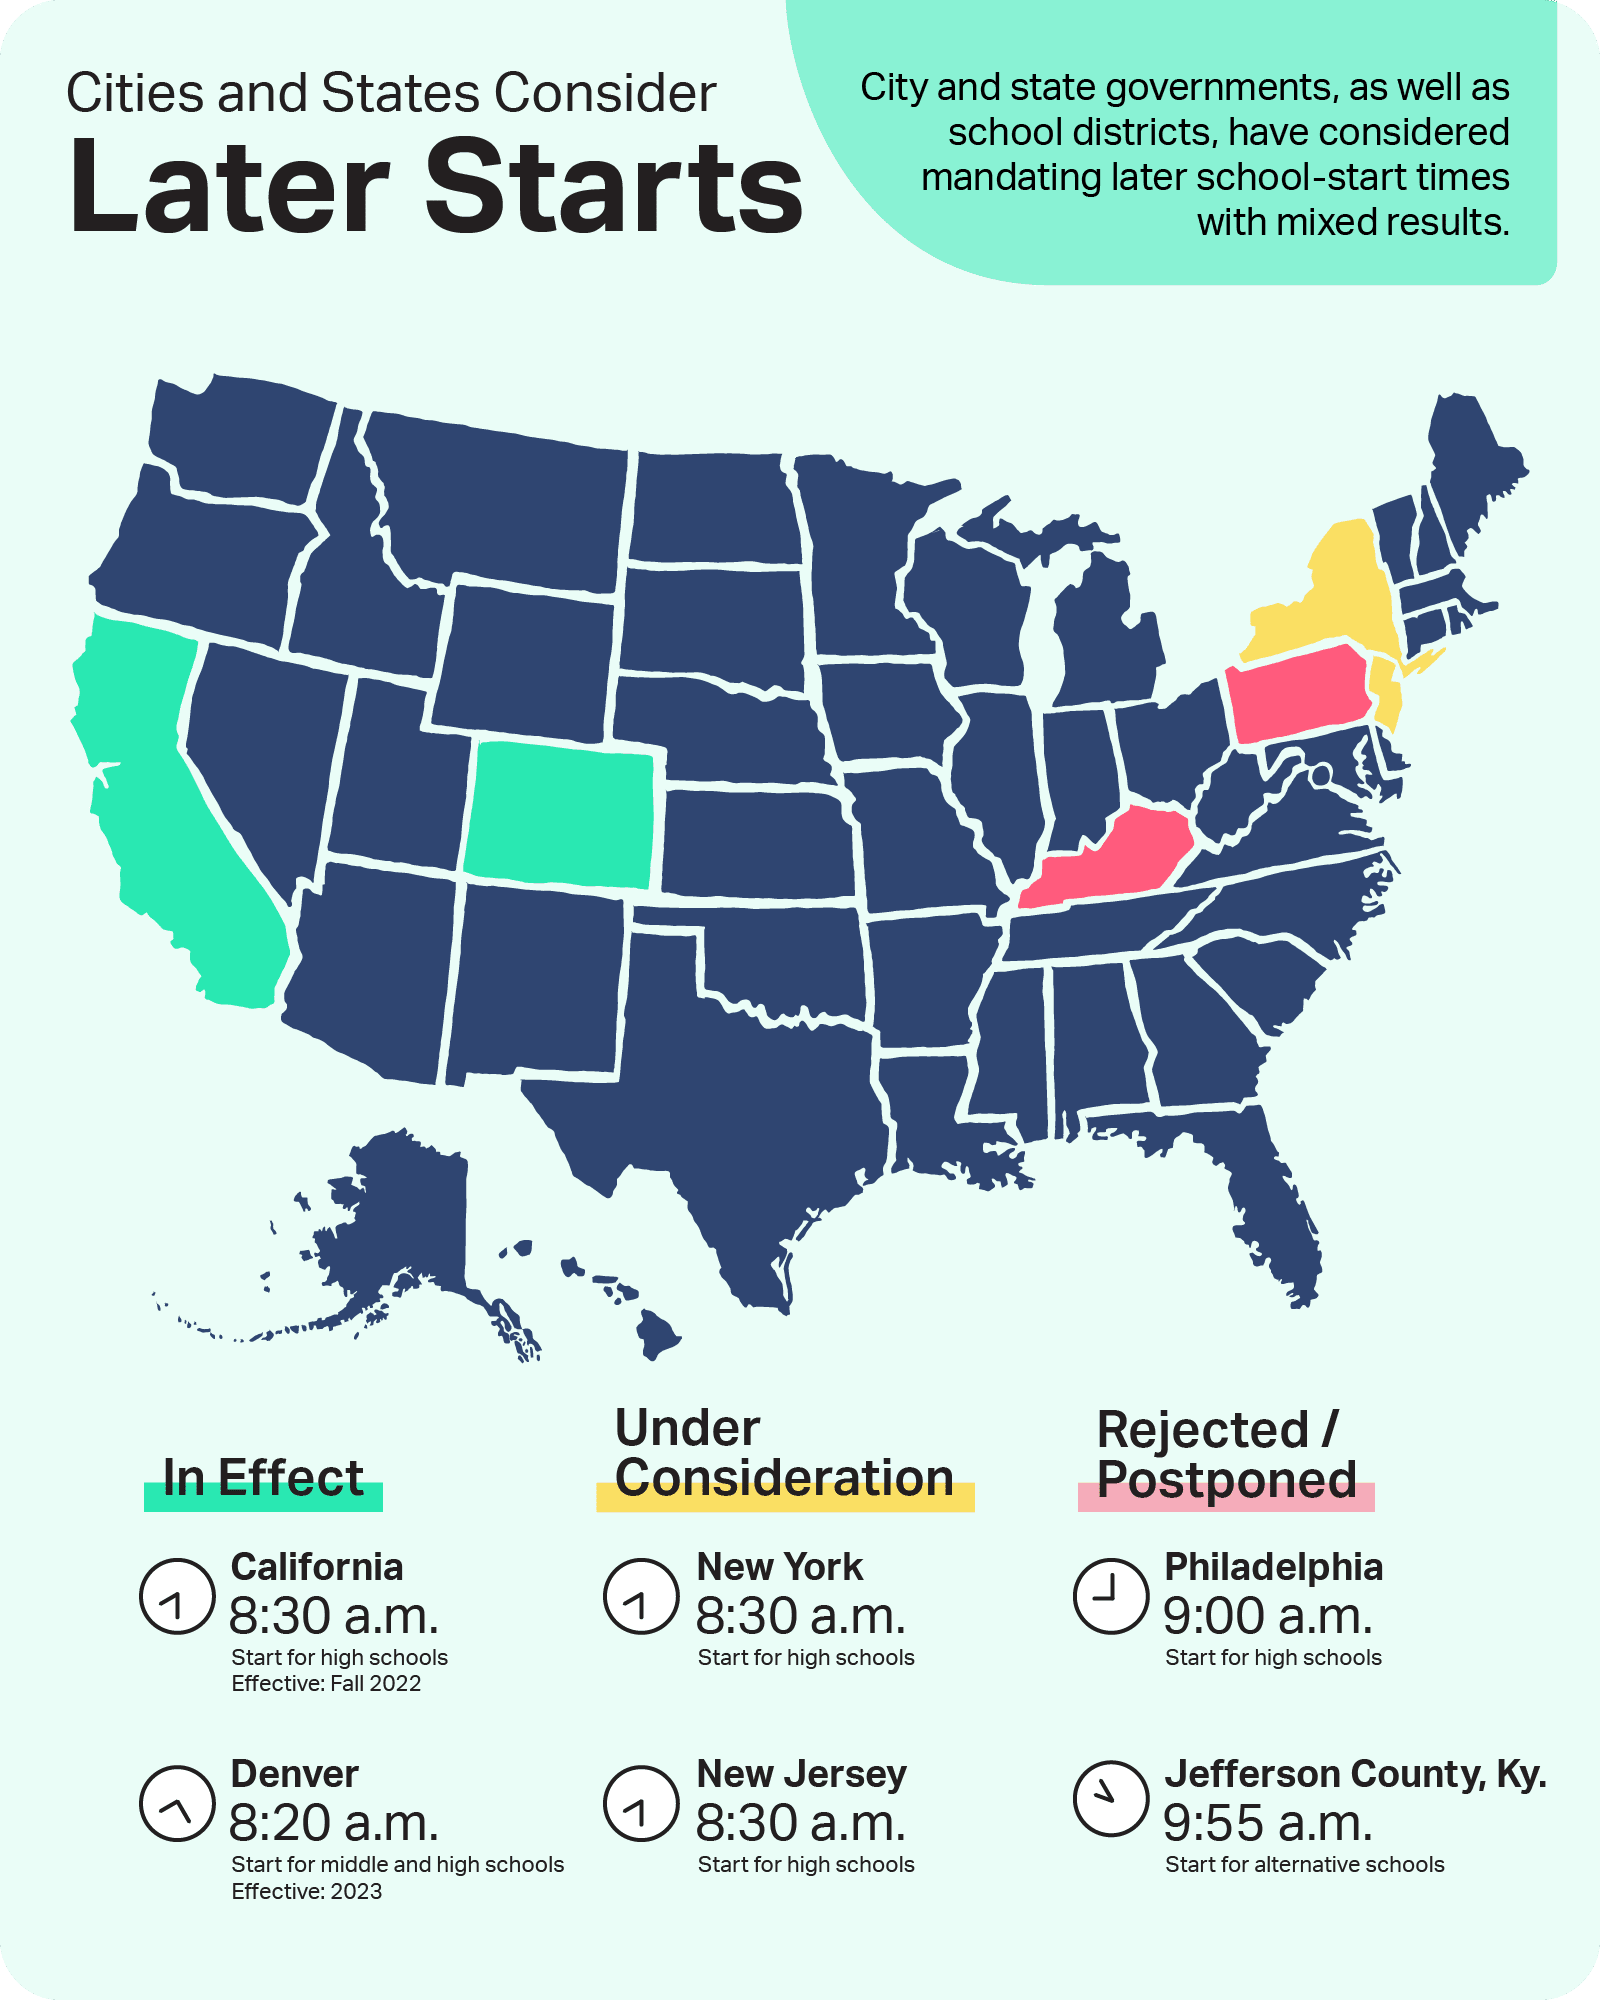 Cities and States Consider Later School Start Times